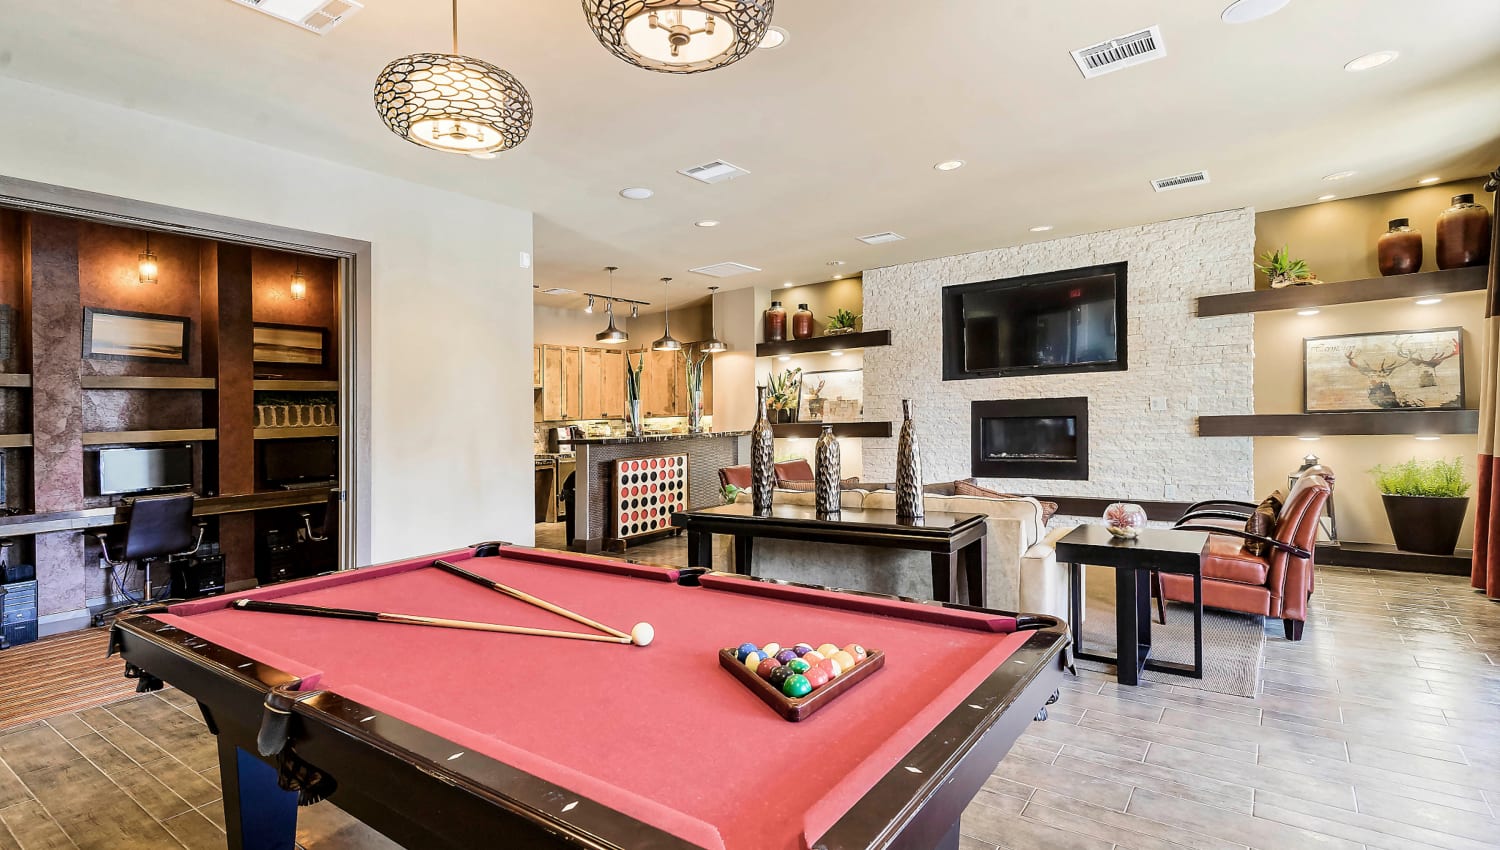 Challenge your friends and neighbors to a game of billiards in the clubhouse at Sedona Ranch in Odessa, Texas